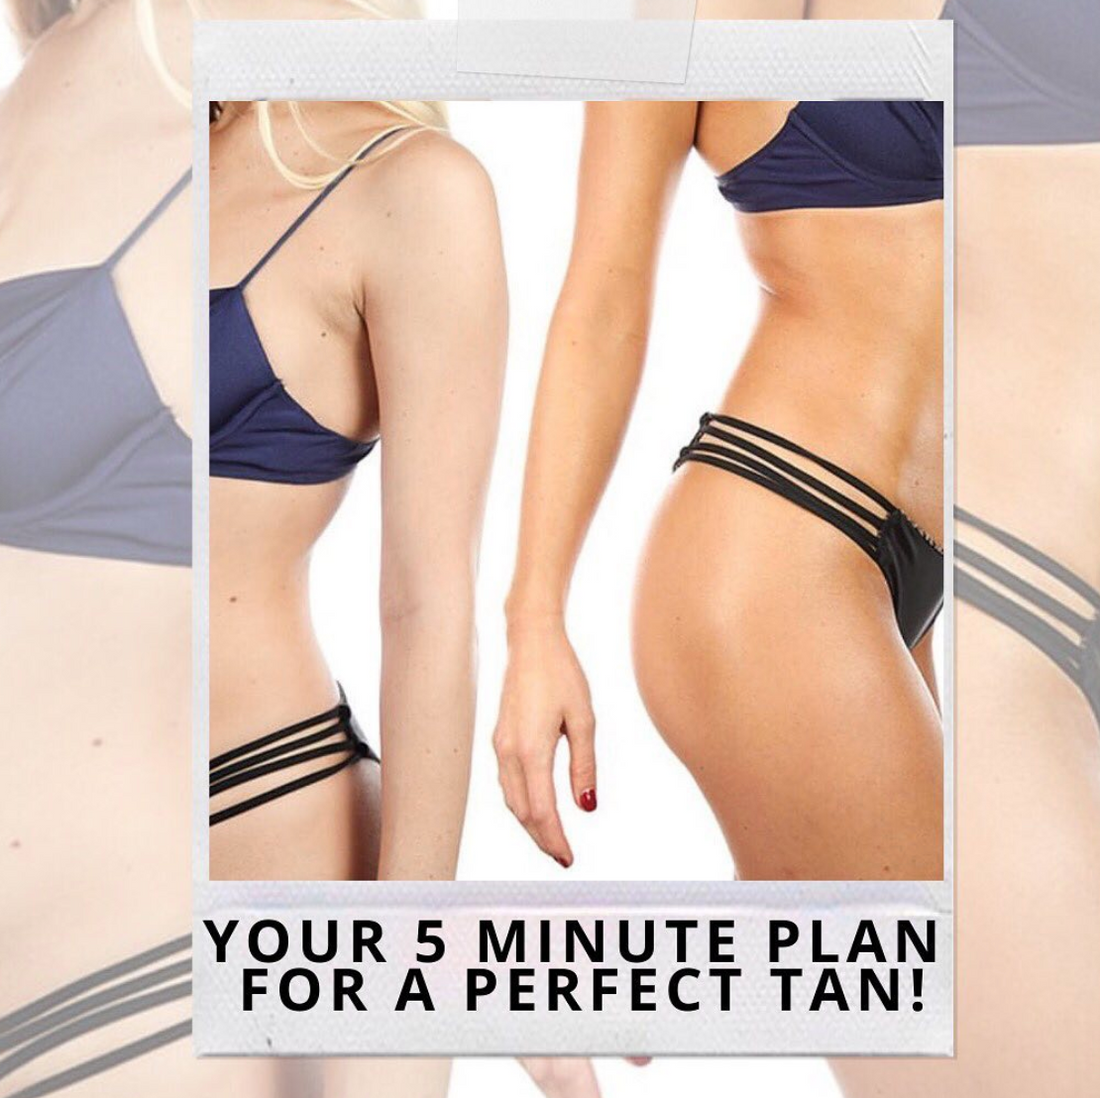 Episode 16: Your Five Minute Plan For a Perfect Tan!